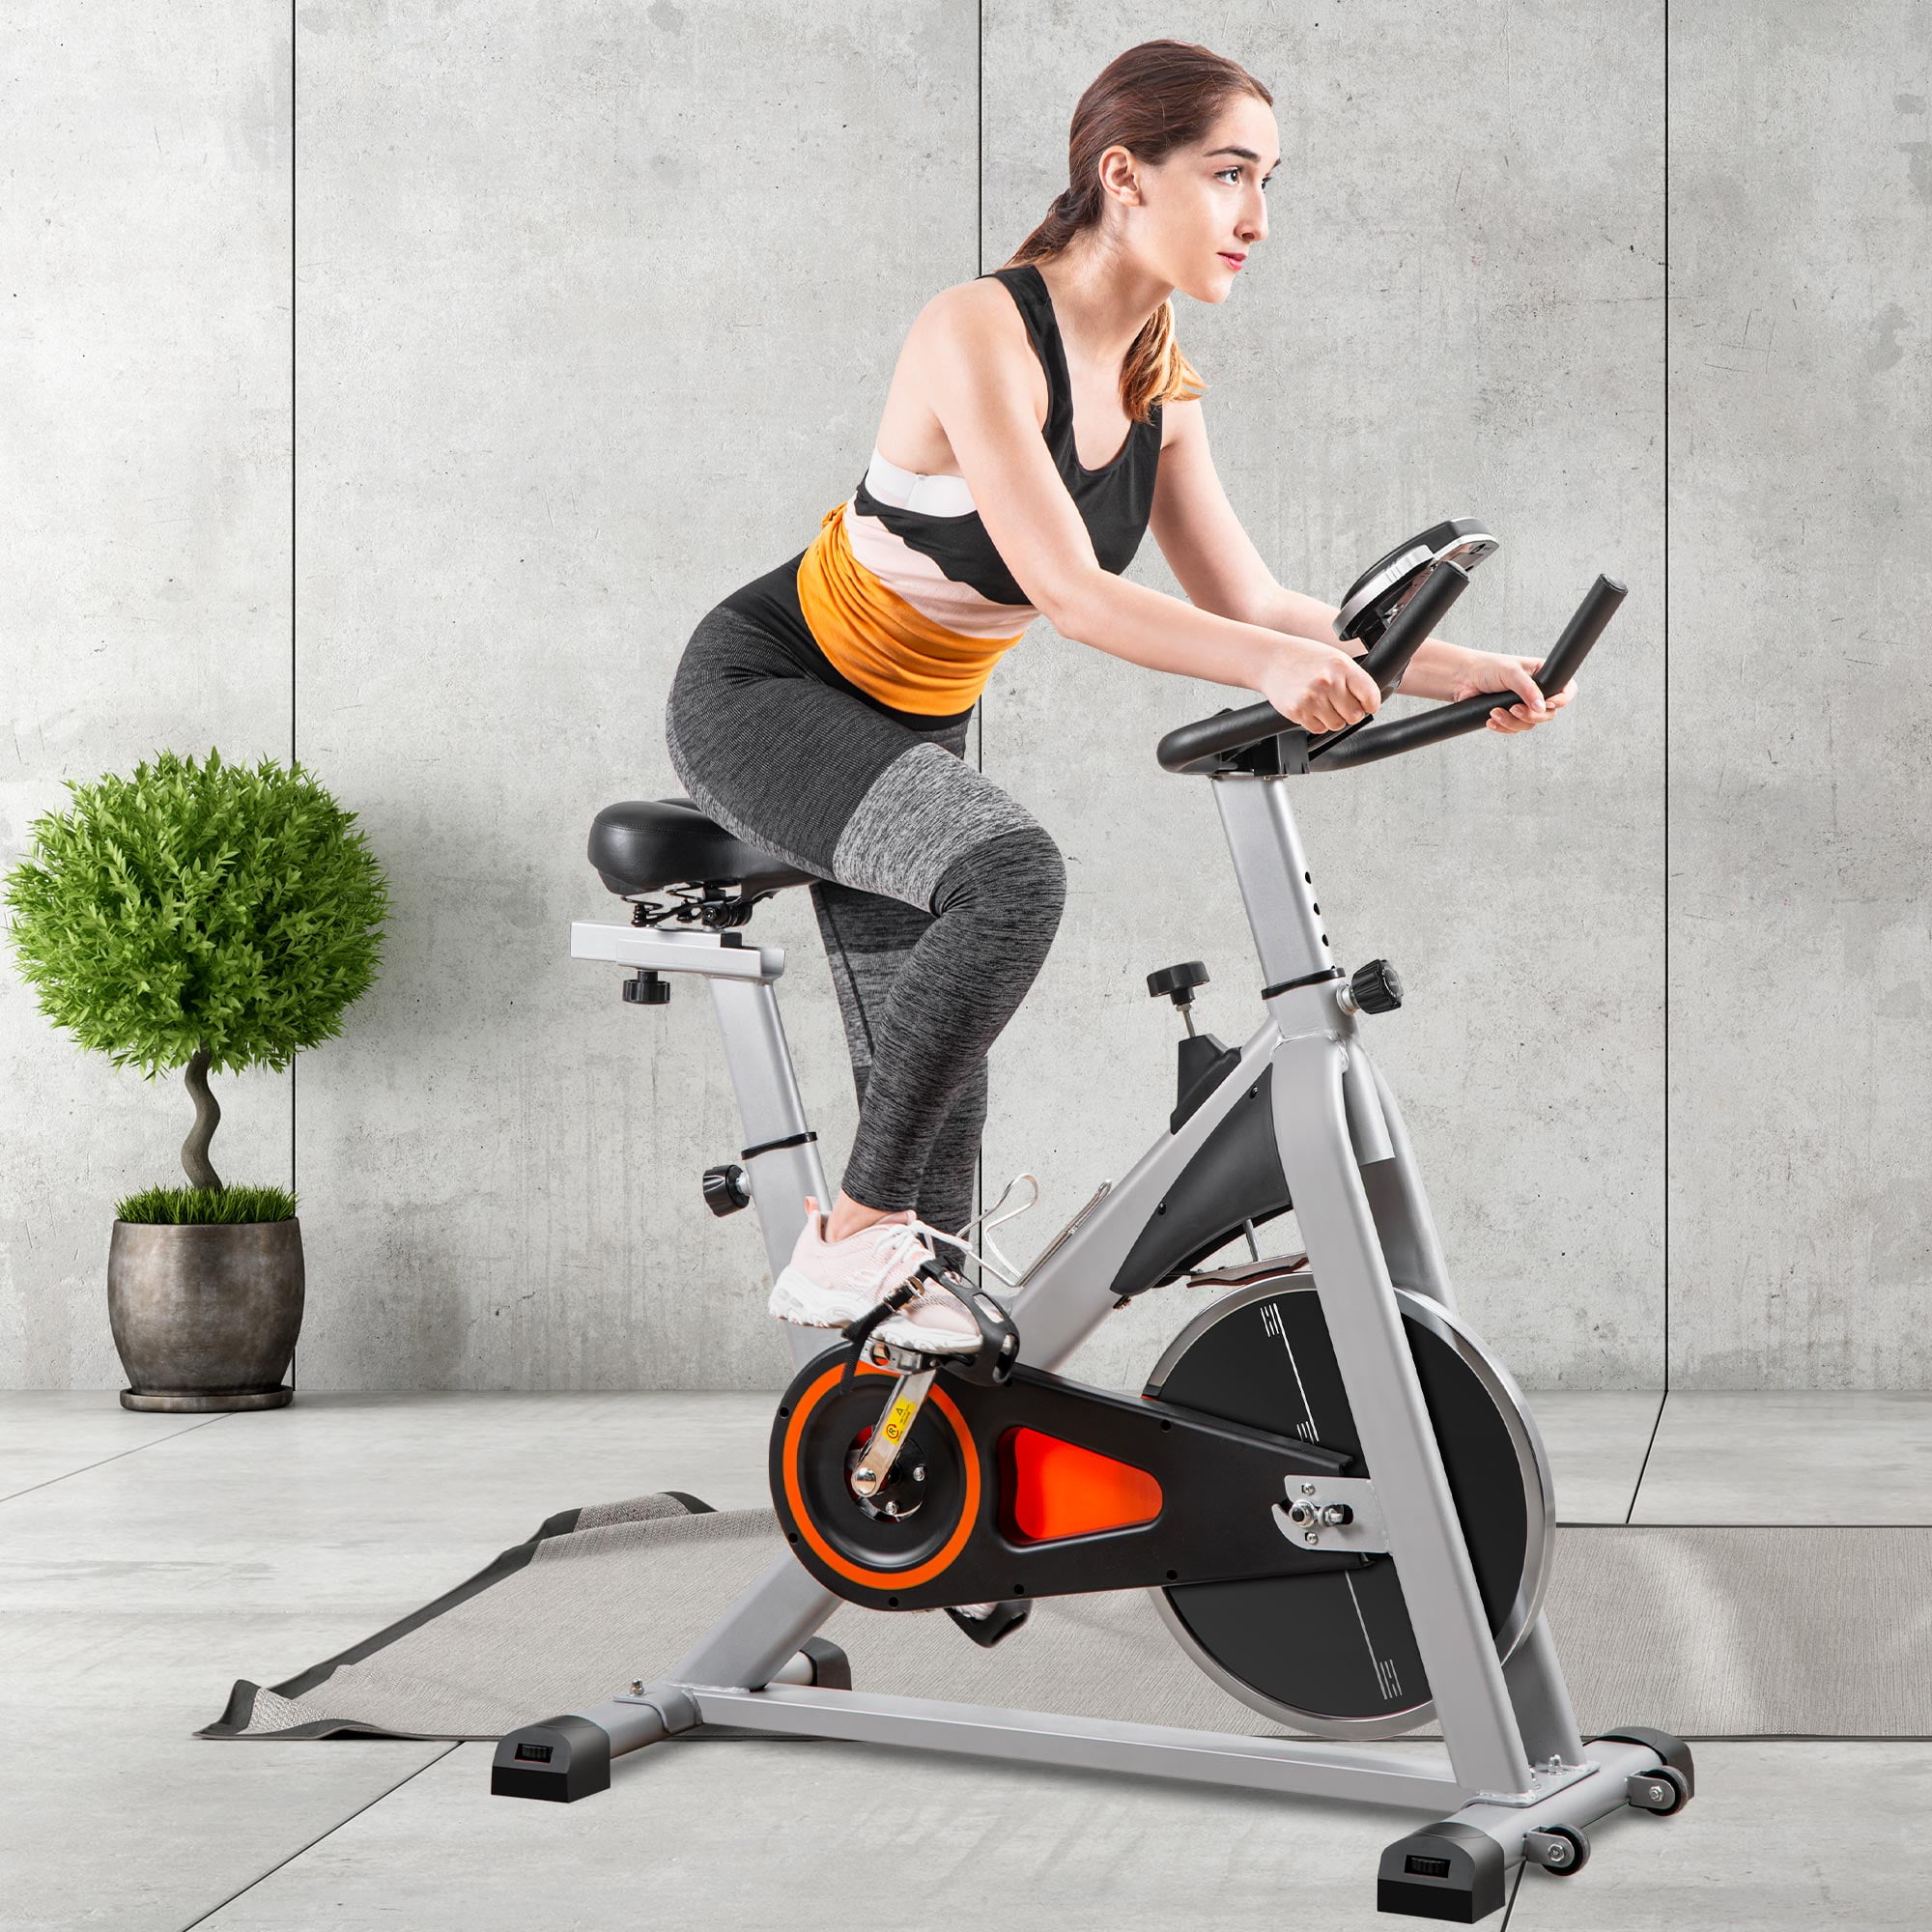 Details about   Exercise Bicycle Cycling Fitness Stationary Bike Cardio Home Indoor Workout Gym 